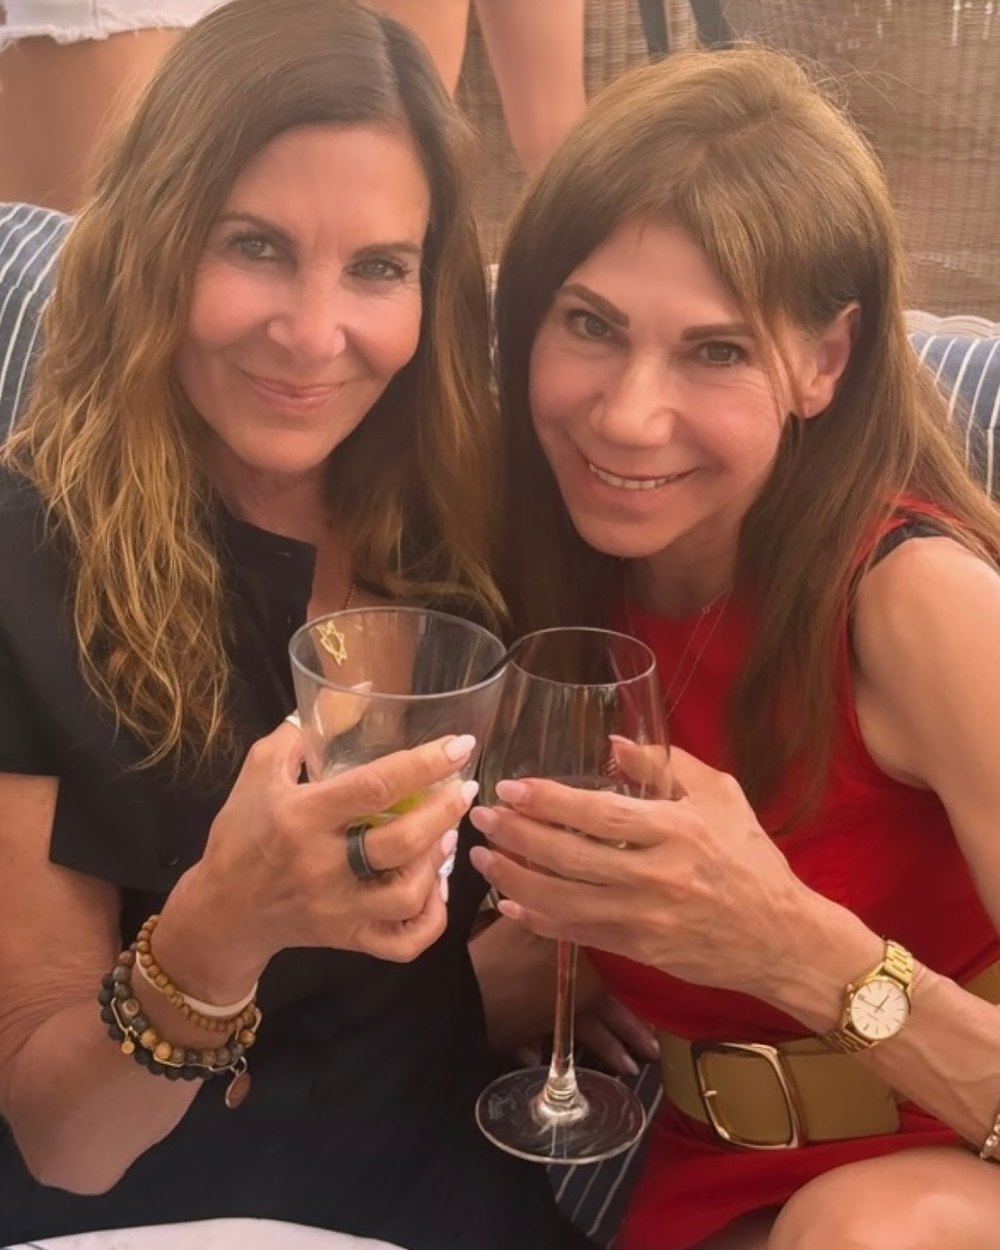 Golden Bachelor Leslie Fhima and Theresa Nist Spend Weekend Together